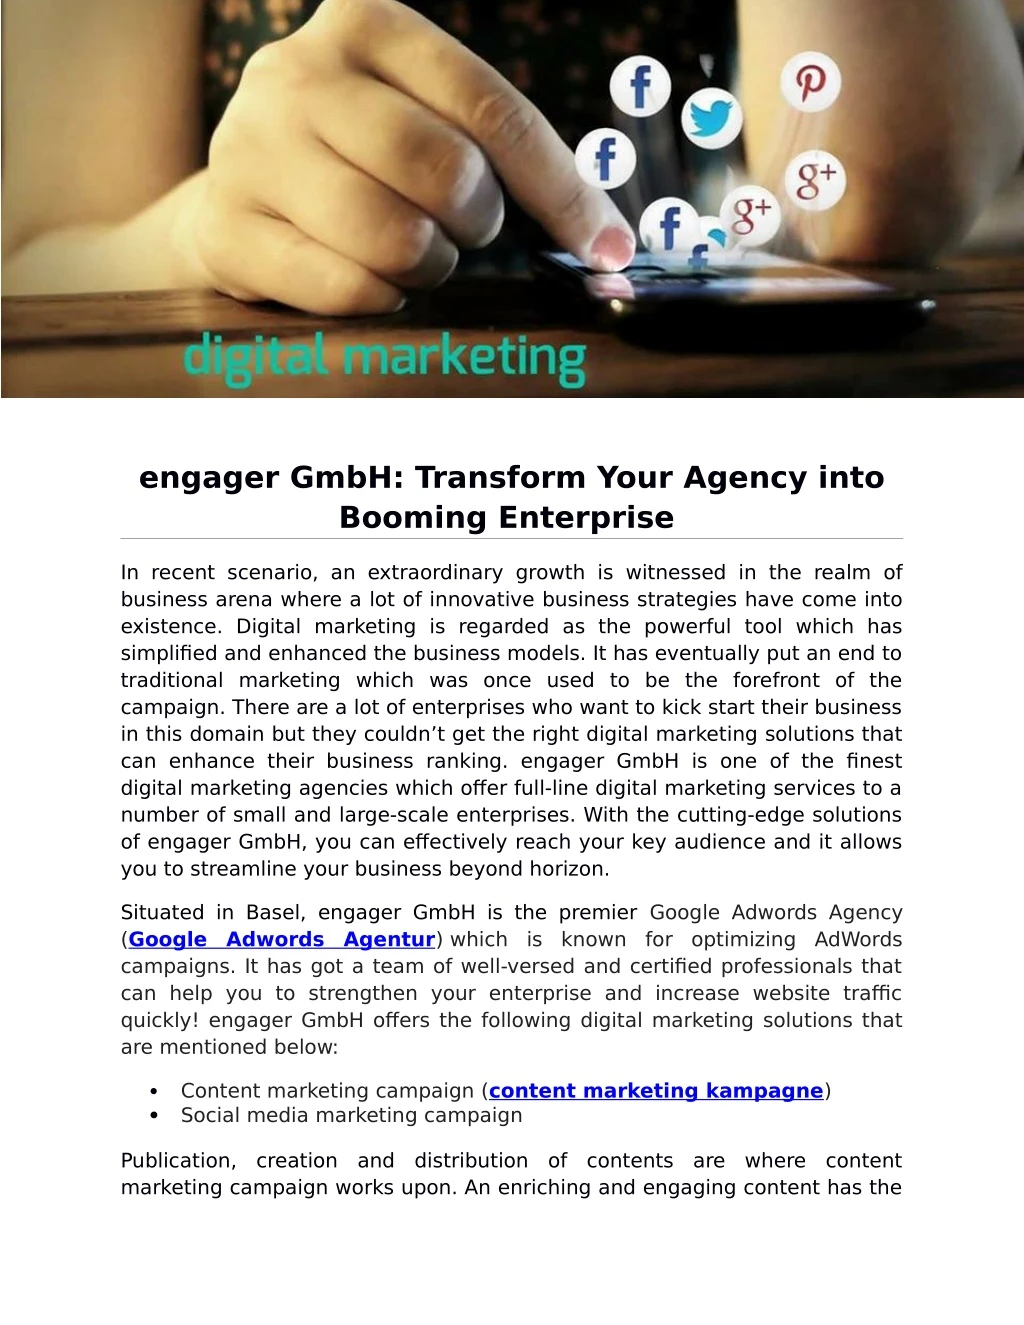 engager gmbh transform your agency into booming